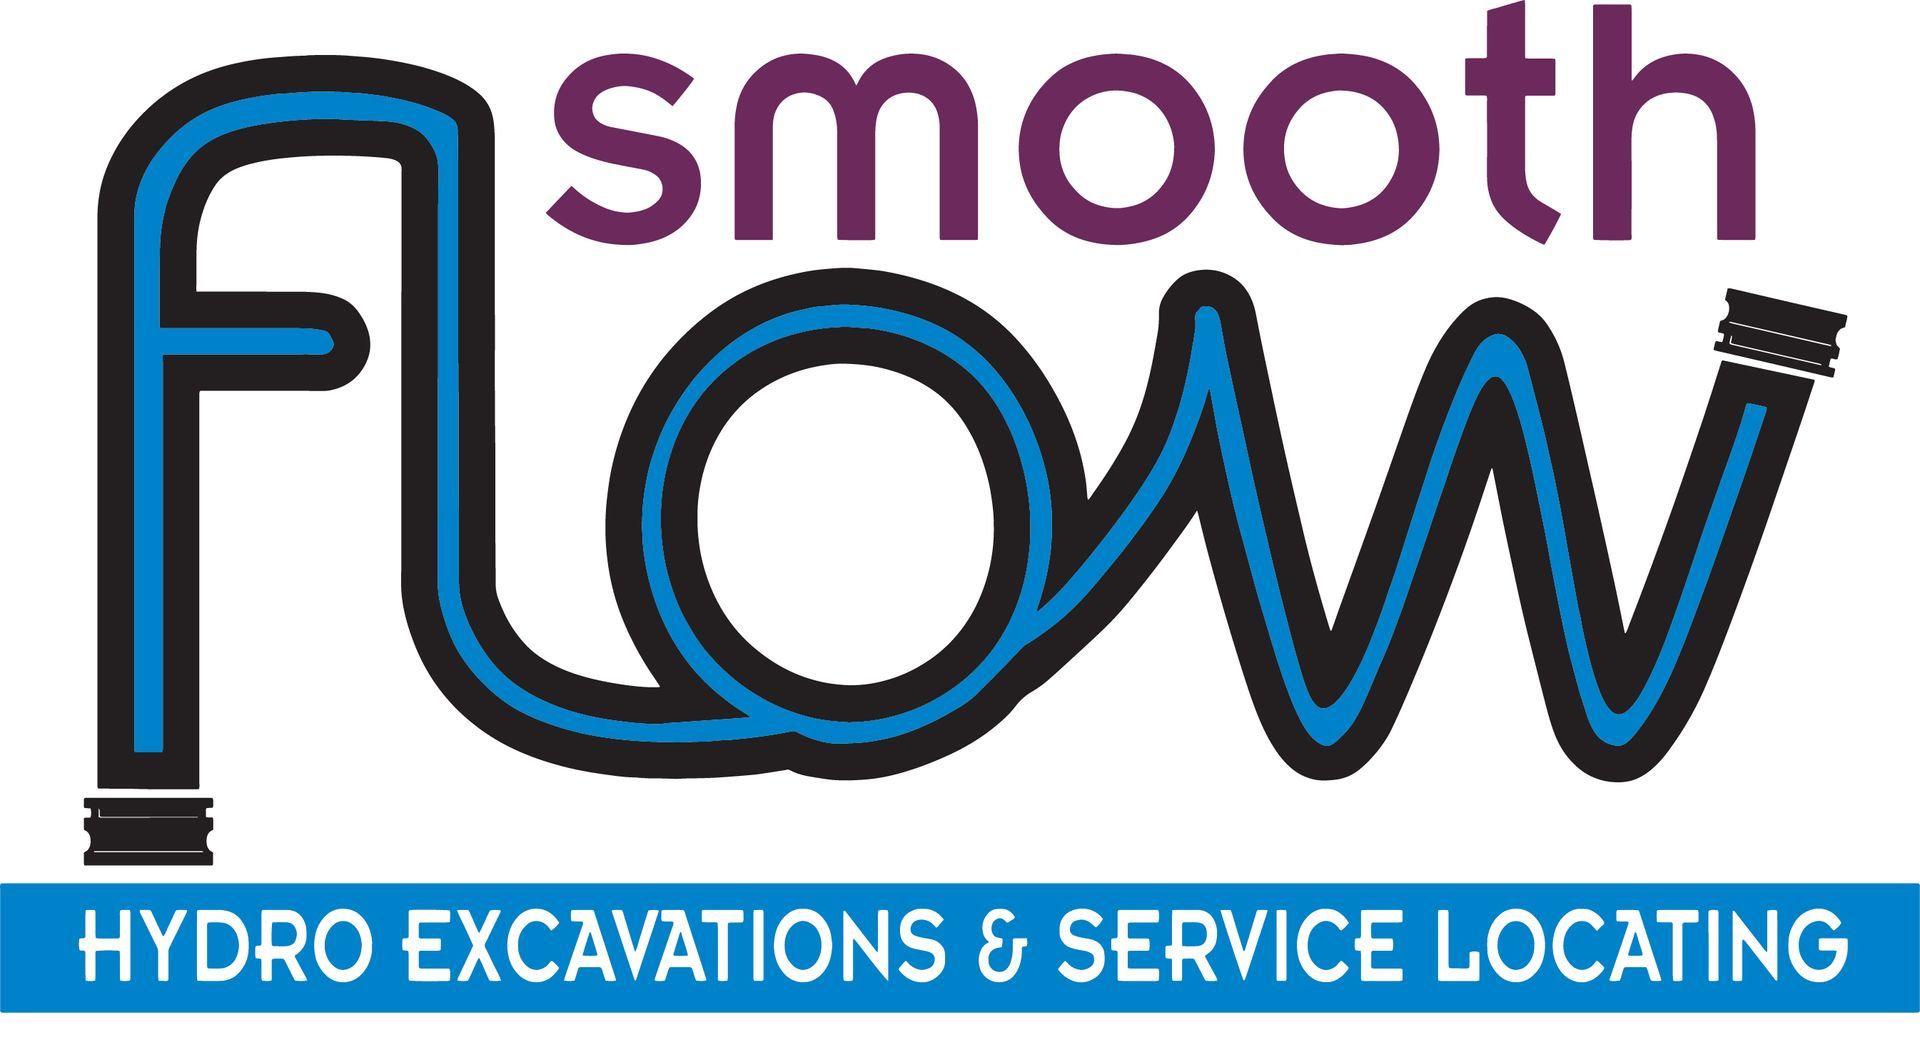 Smooth Flow Group